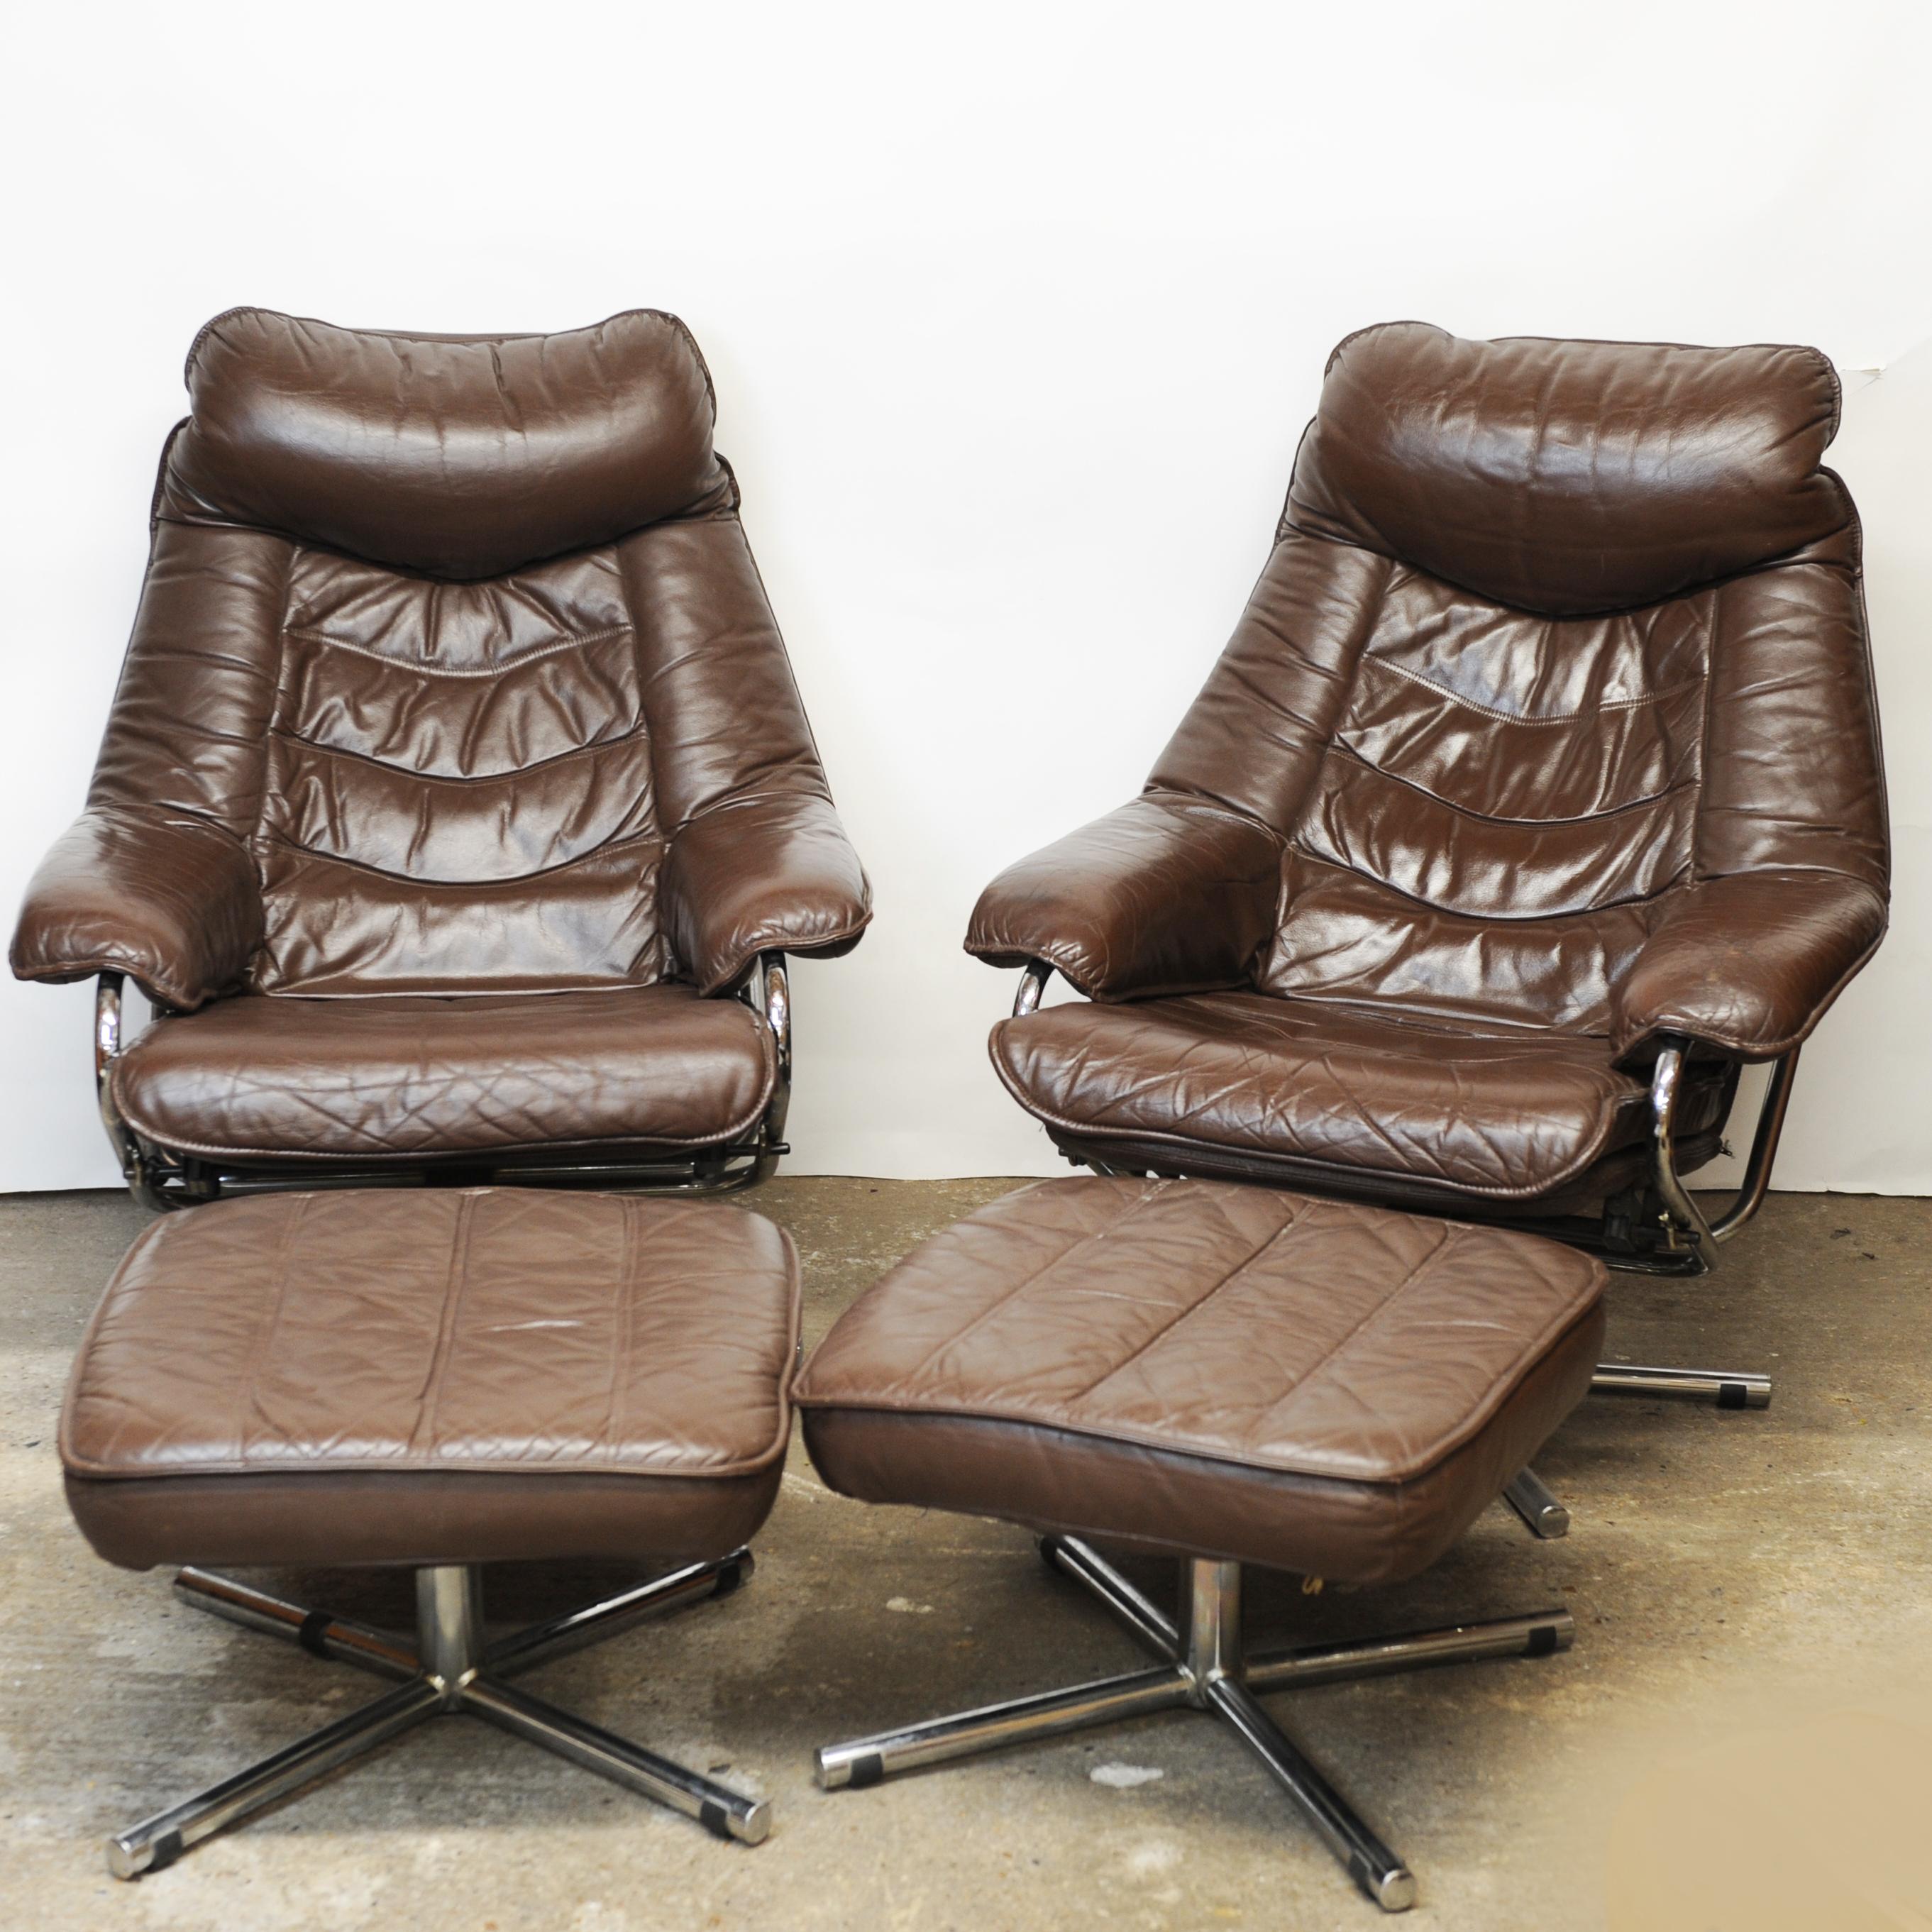 Pair of Norwegian Lounge Chairs with Footstools in Brown Leather by Skoghaus  For Sale 3